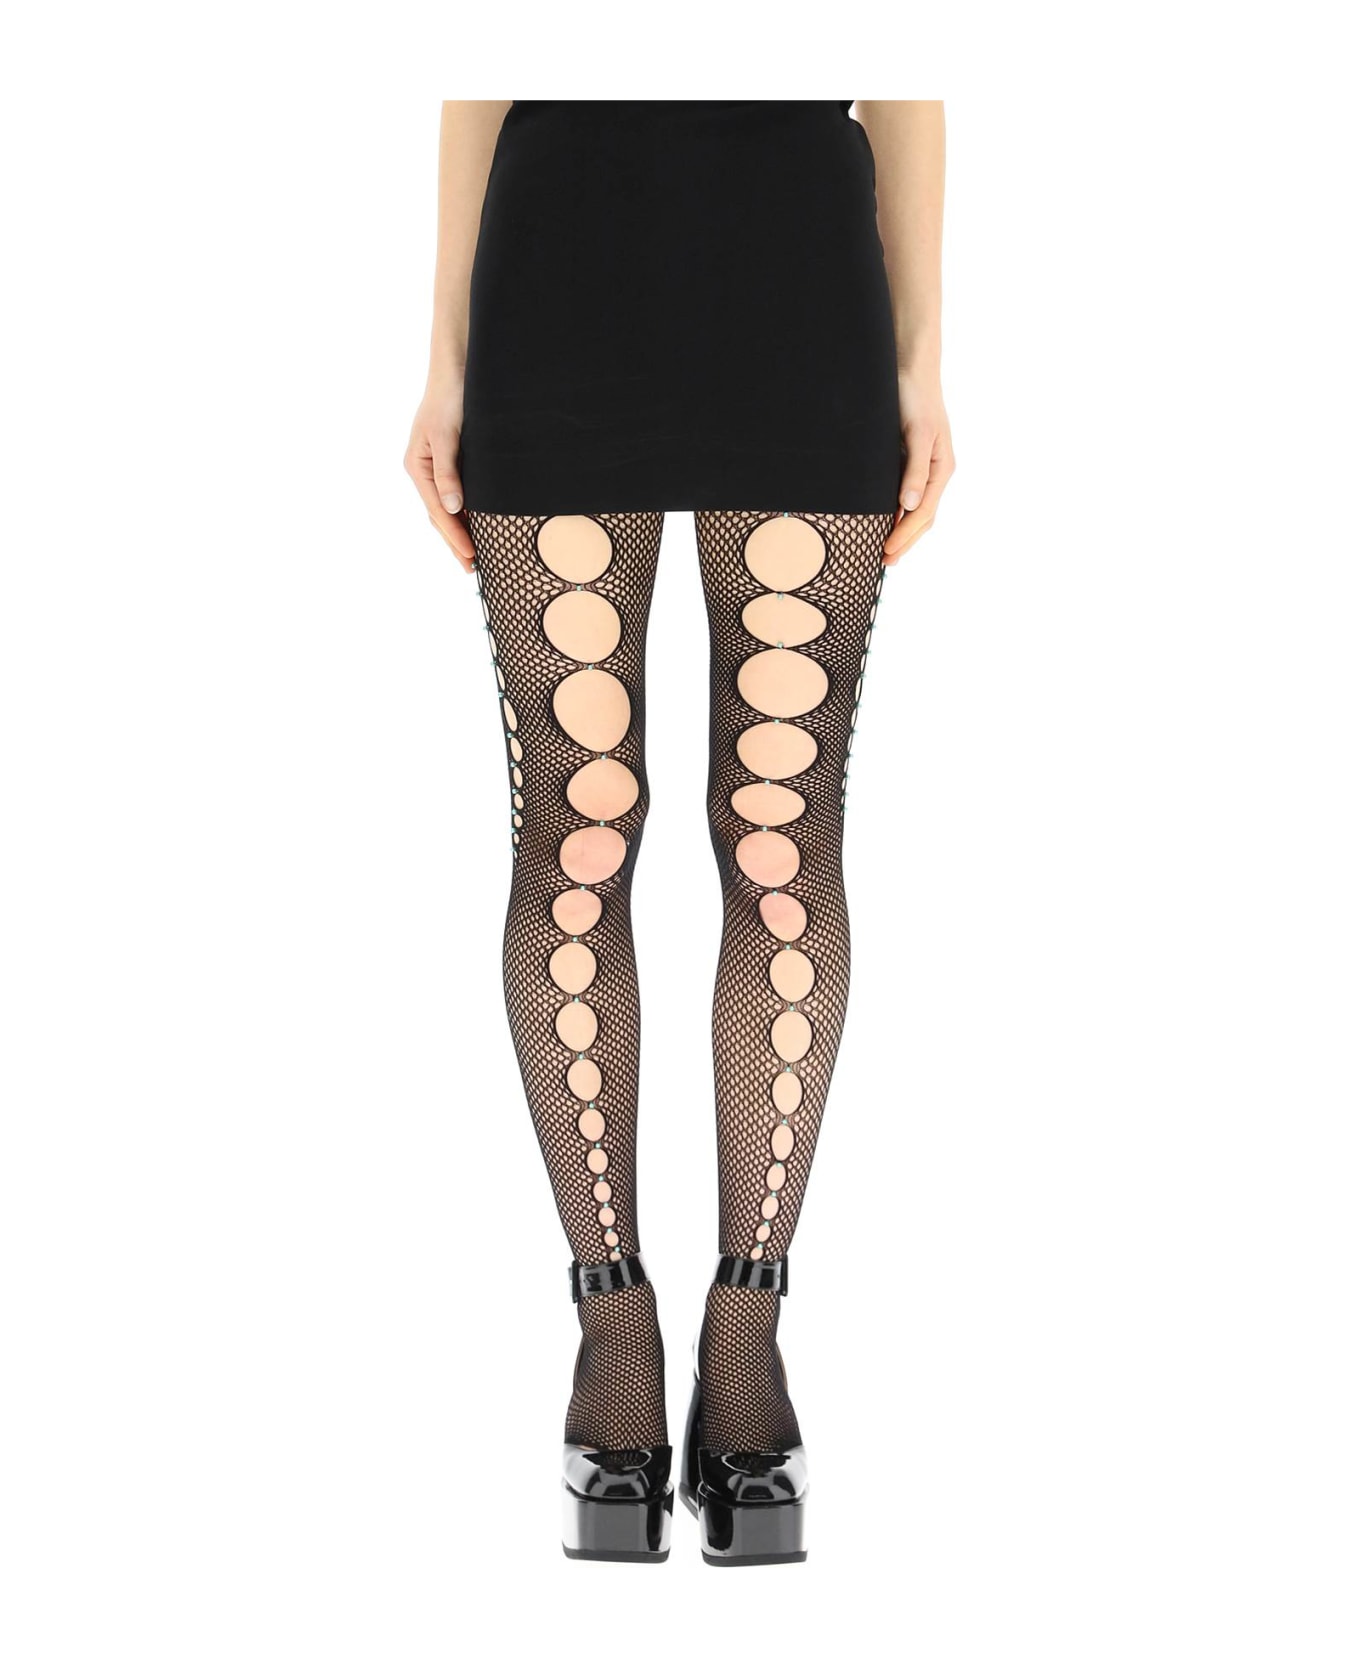 Rui fleece Stockings With Cut-out And Beads - ONYX (Black)